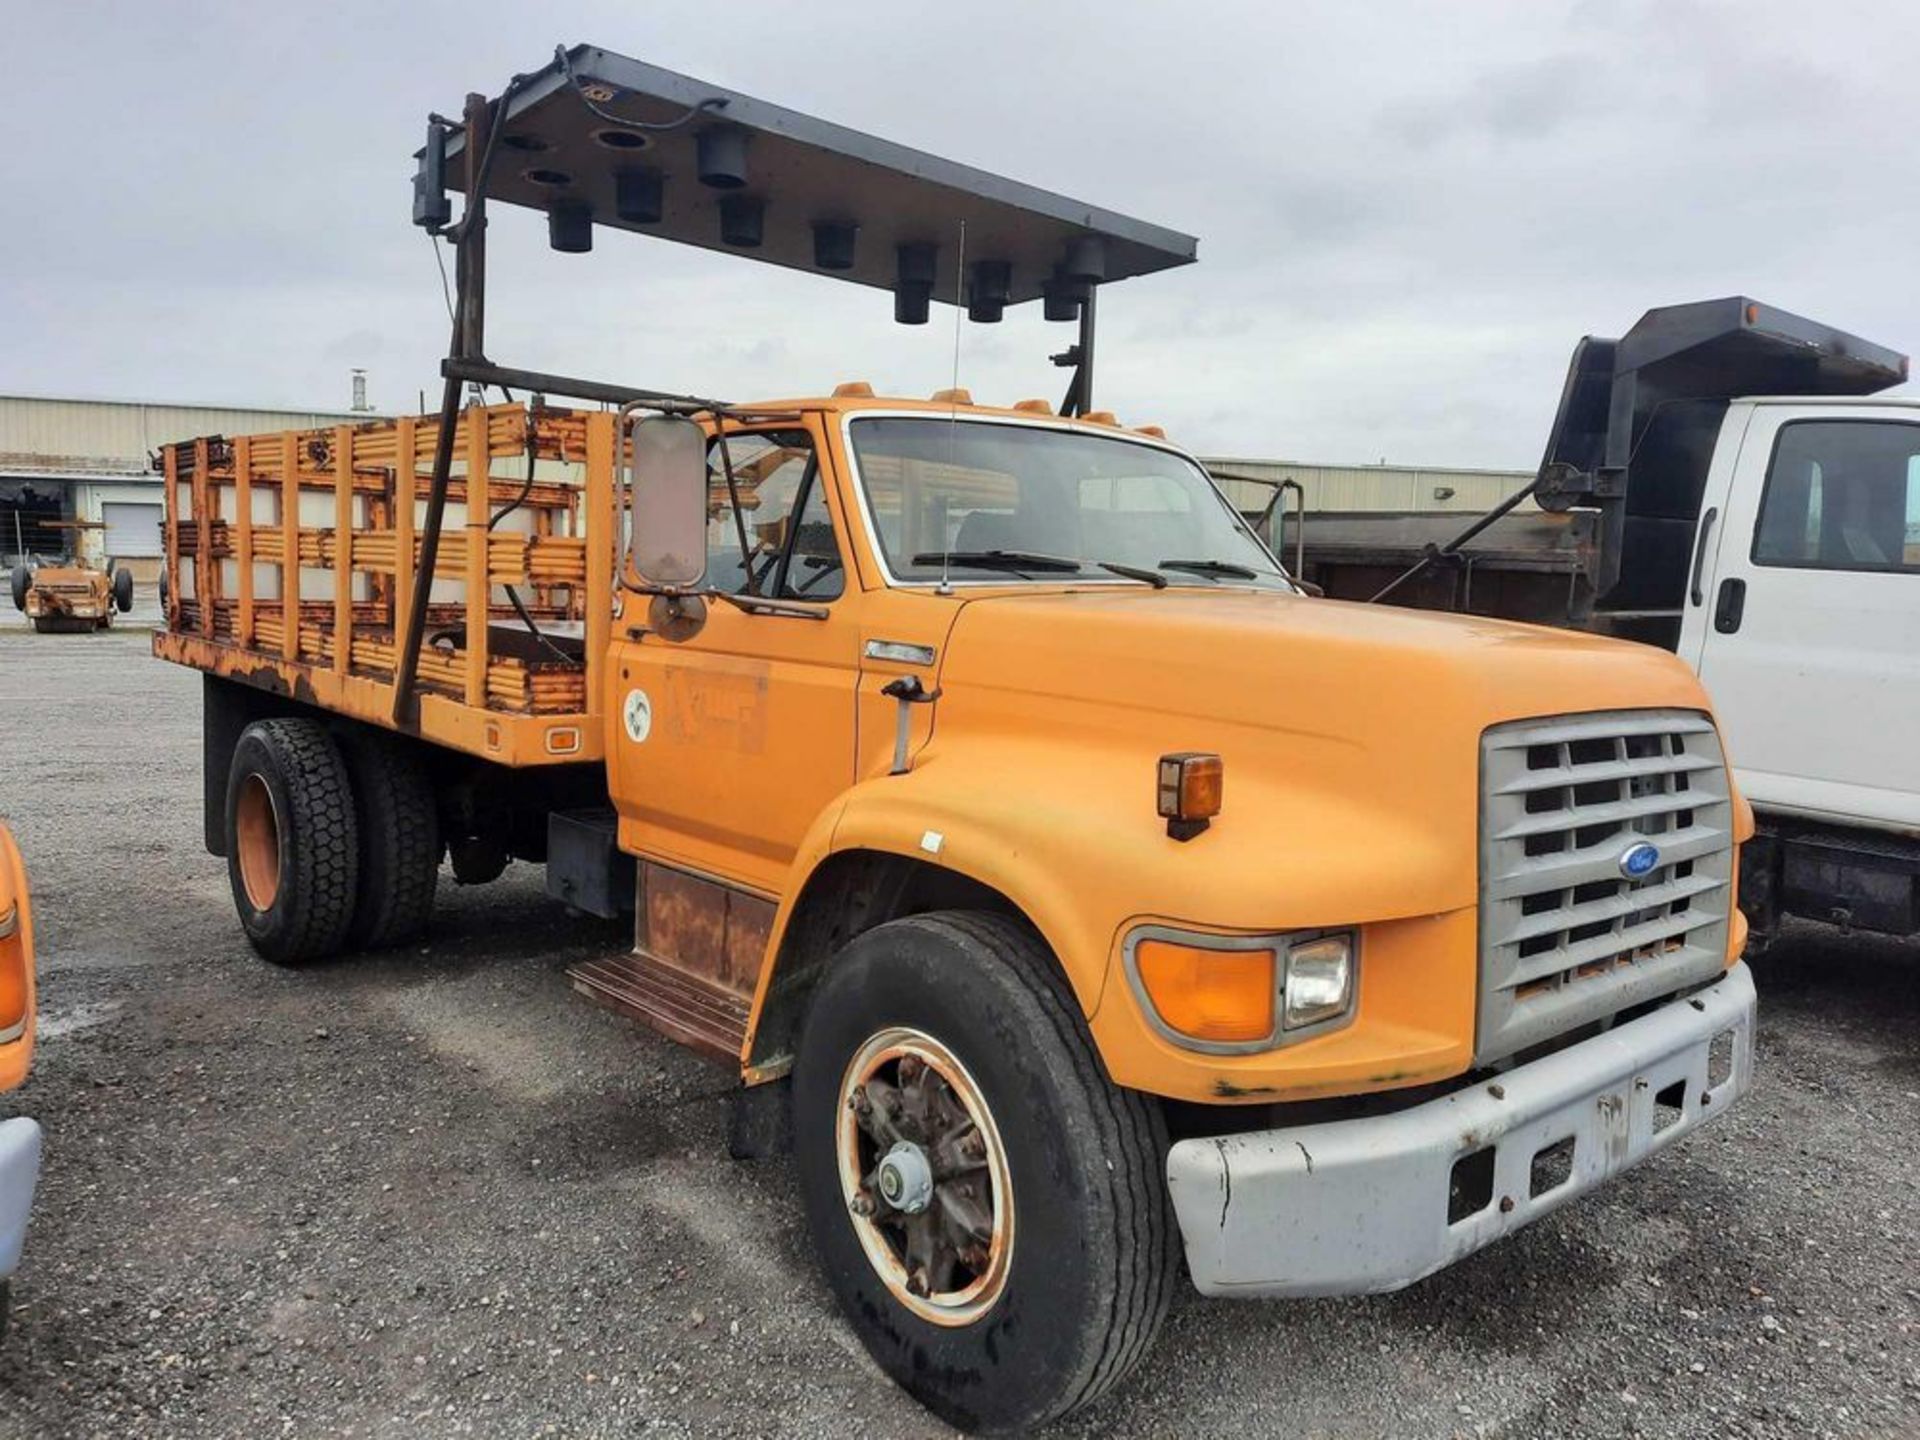 1995 FORD F800 STAKE BODY TRUCK W/ARROW BOARD (VDOT UNIT: R01244) - Image 4 of 23